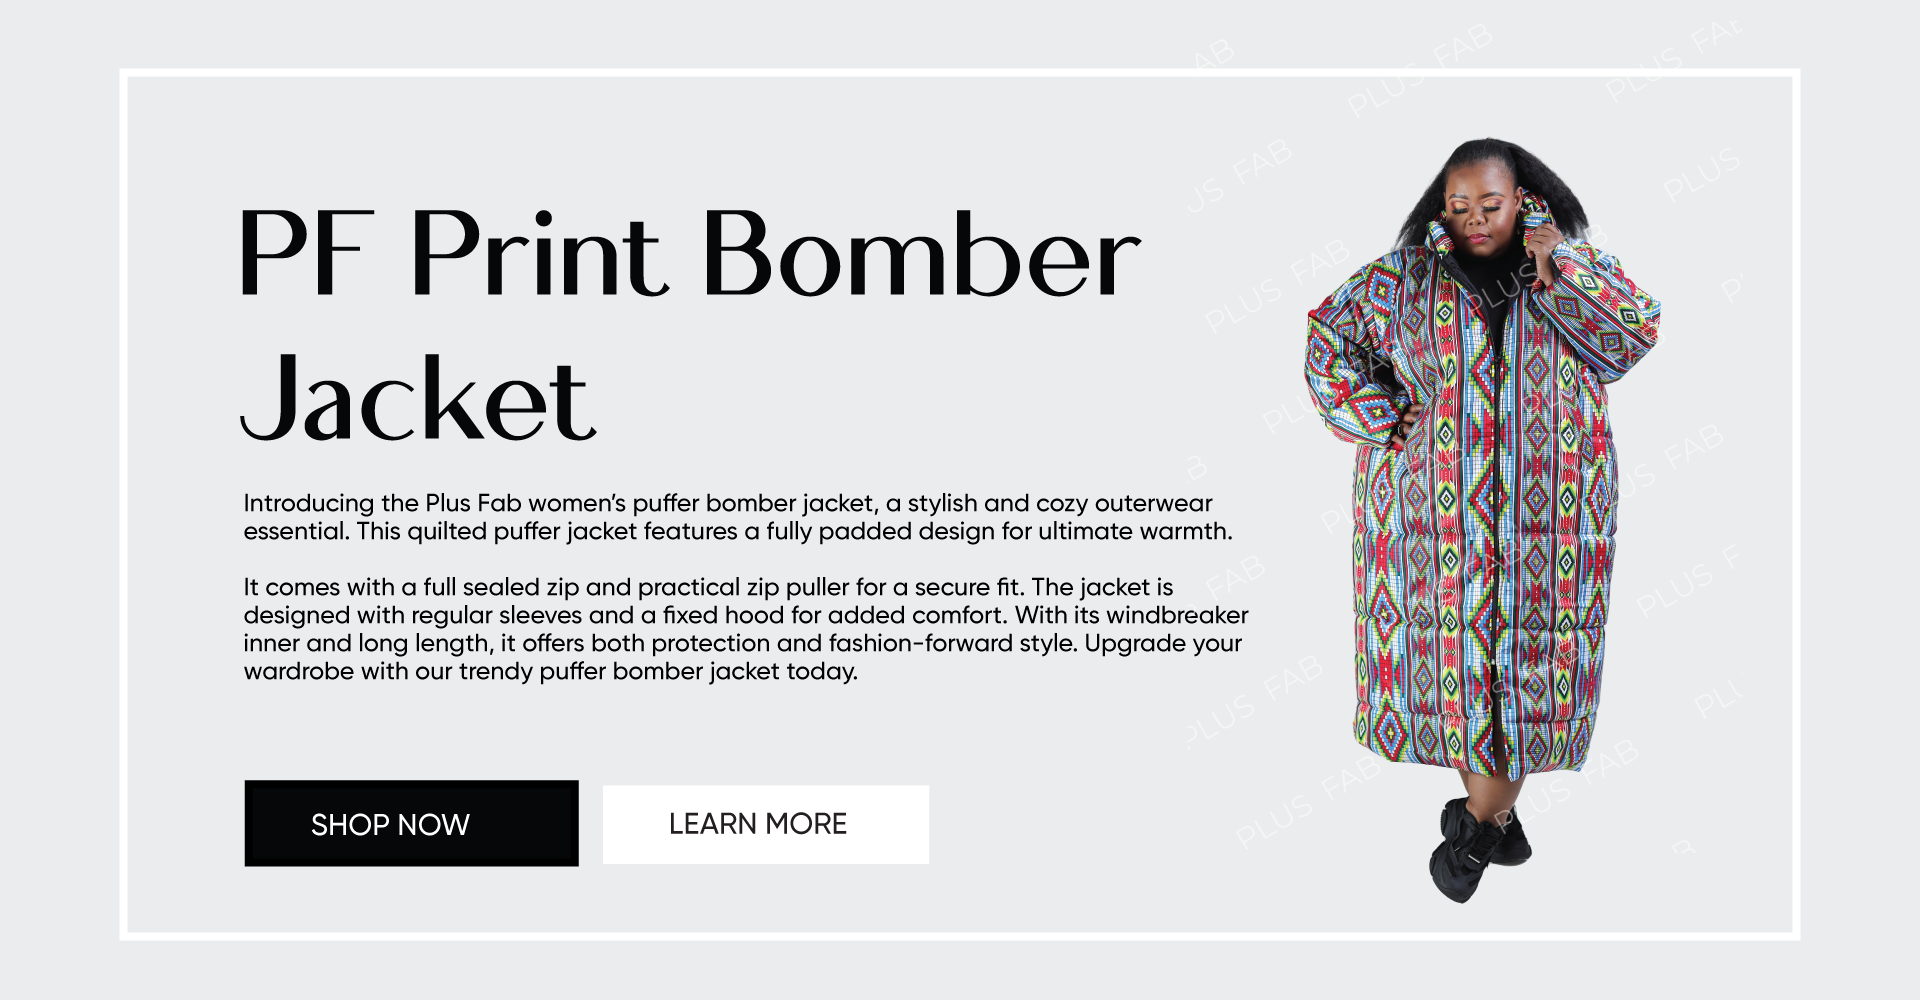 PF Print Bomber Jacket (Homepage Poster)